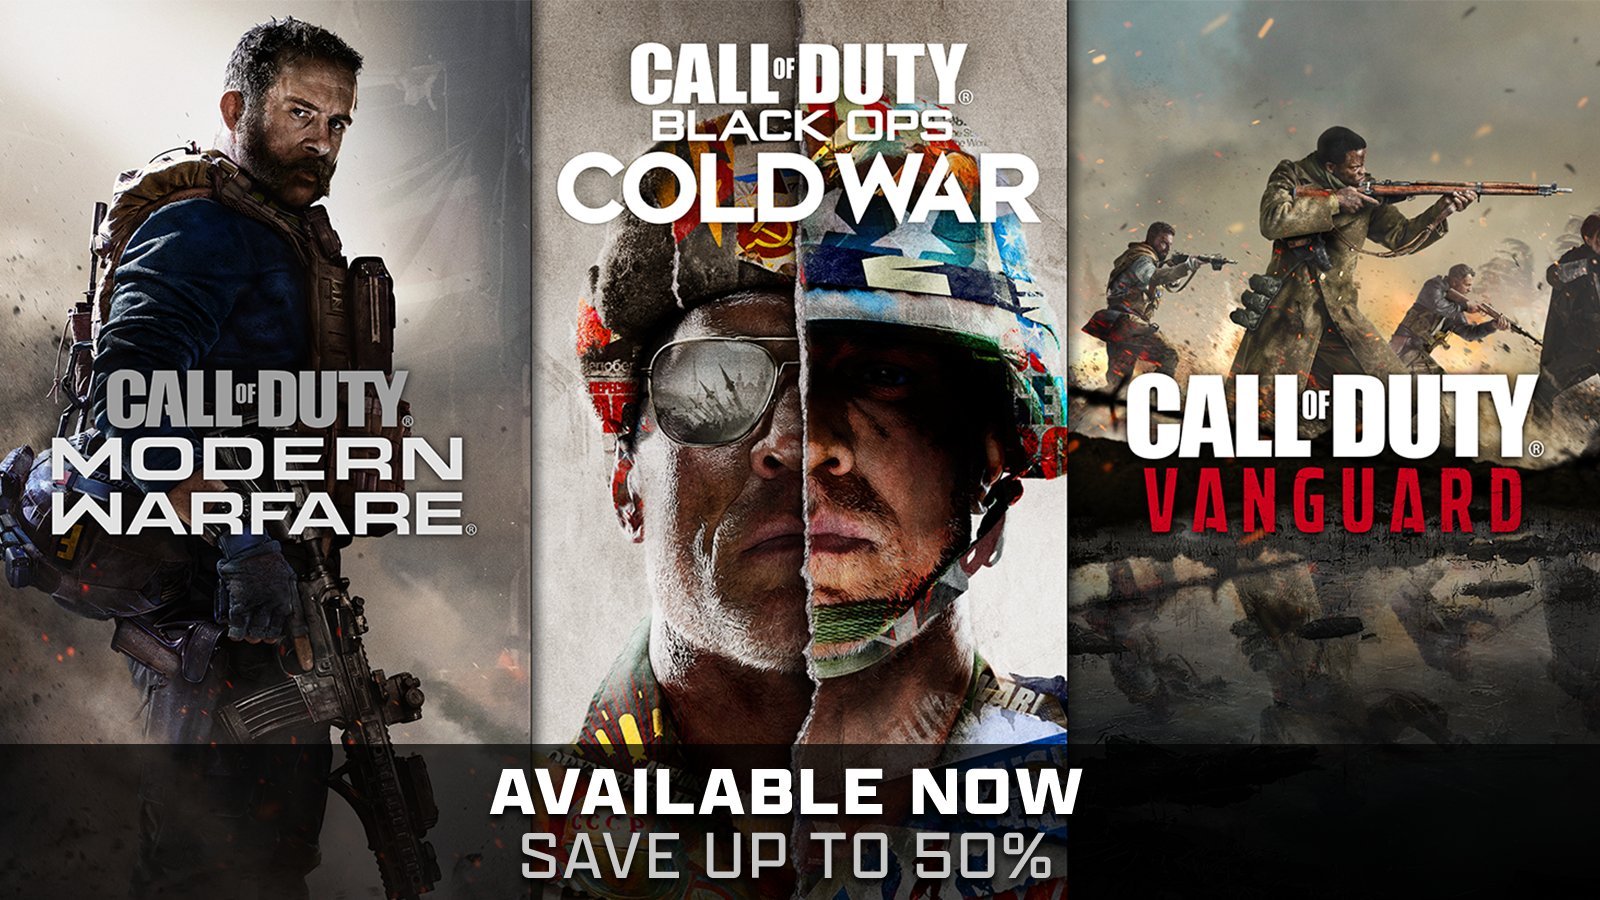 Call Of Duty  Call of duty black, Call of duty, Popular games